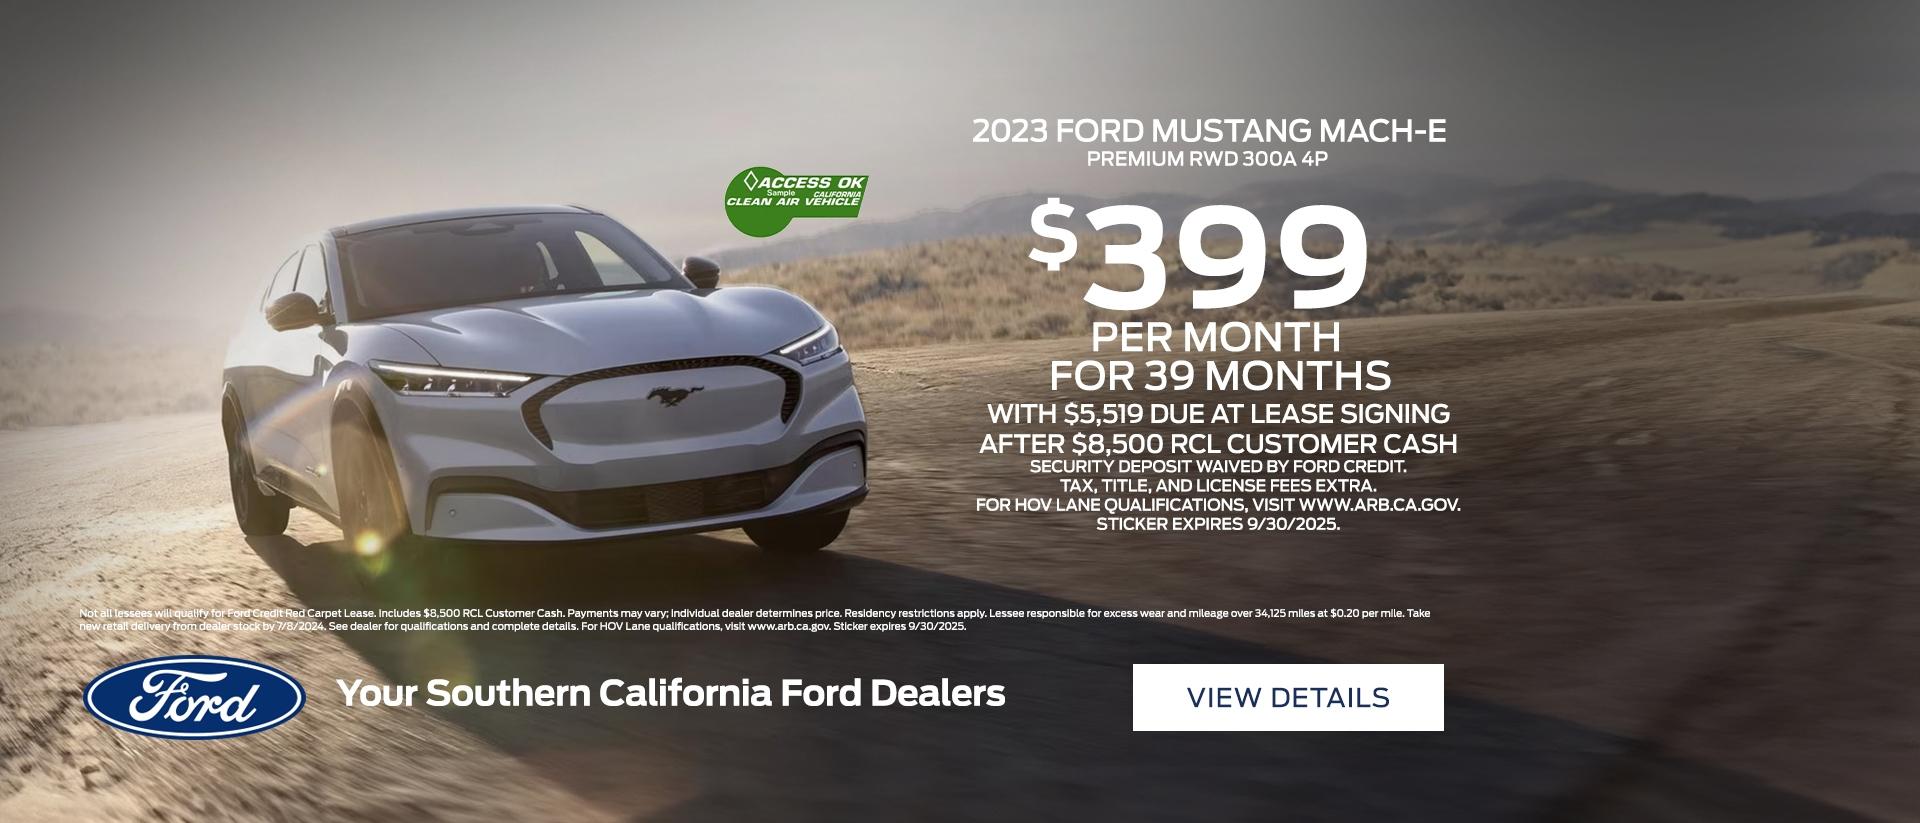 2023 Ford Mustang Mach-E Lease Offer | Southern California Ford Dealers